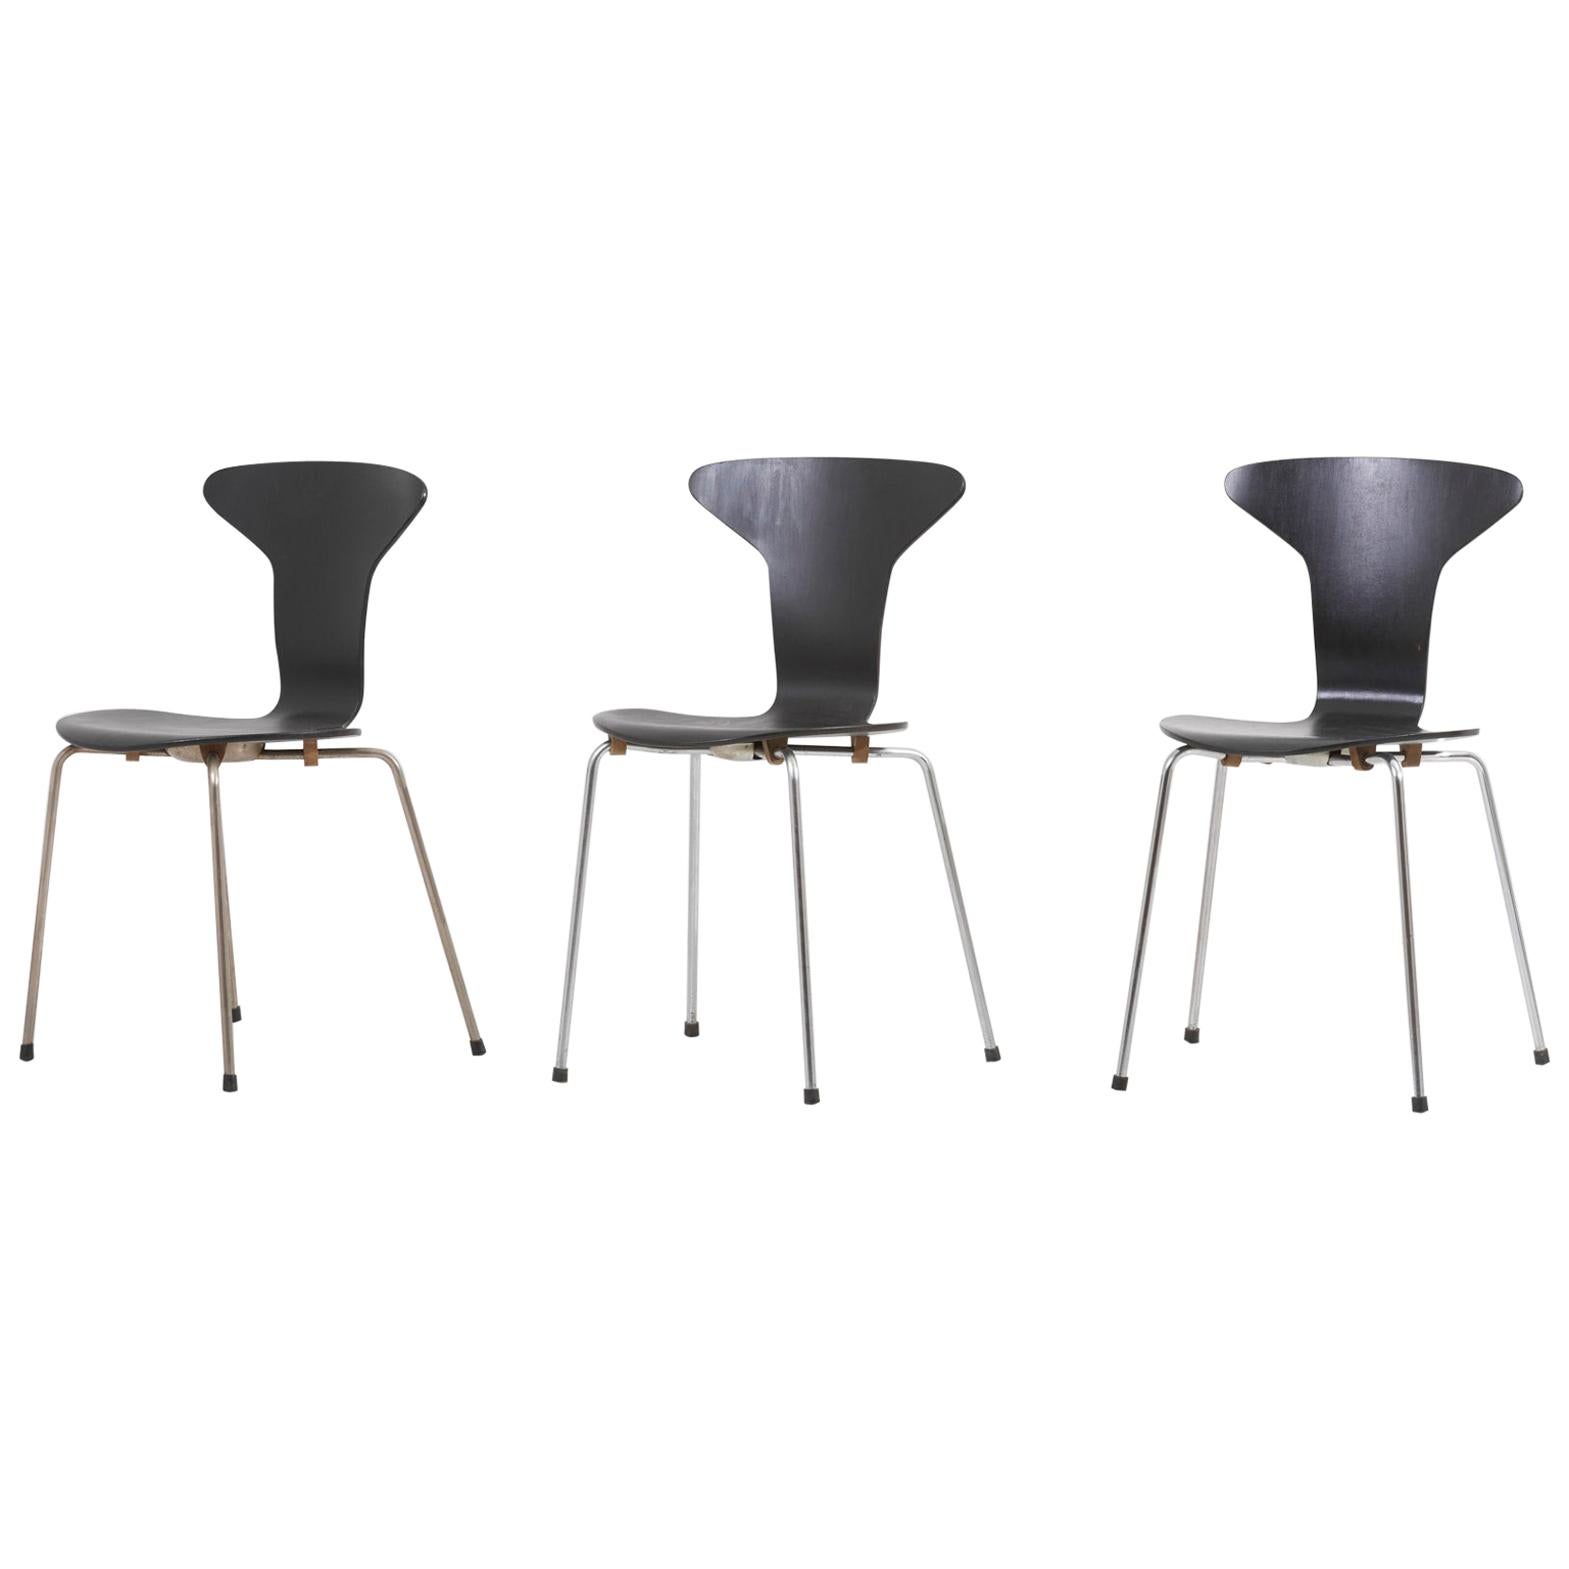 Set of 3 Mosquito Munkegård Dining Chairs by Arne Jacobsen, Denmark, 1950s For Sale